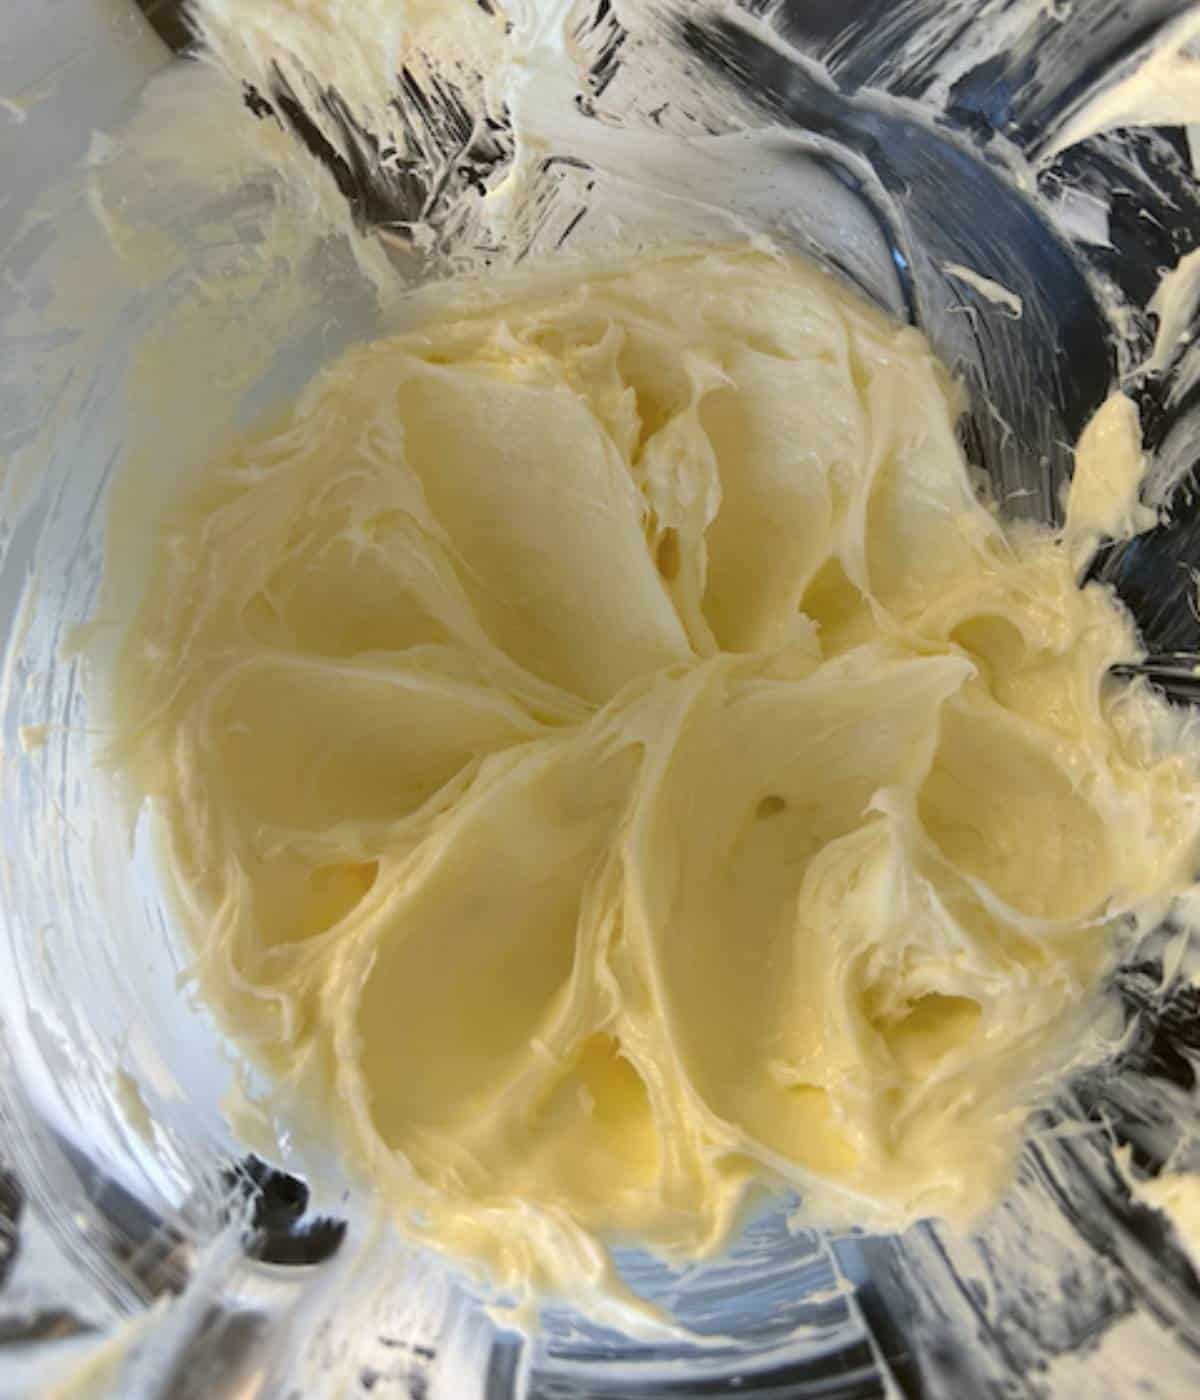 Cream cheese and sugar in stand mixer.